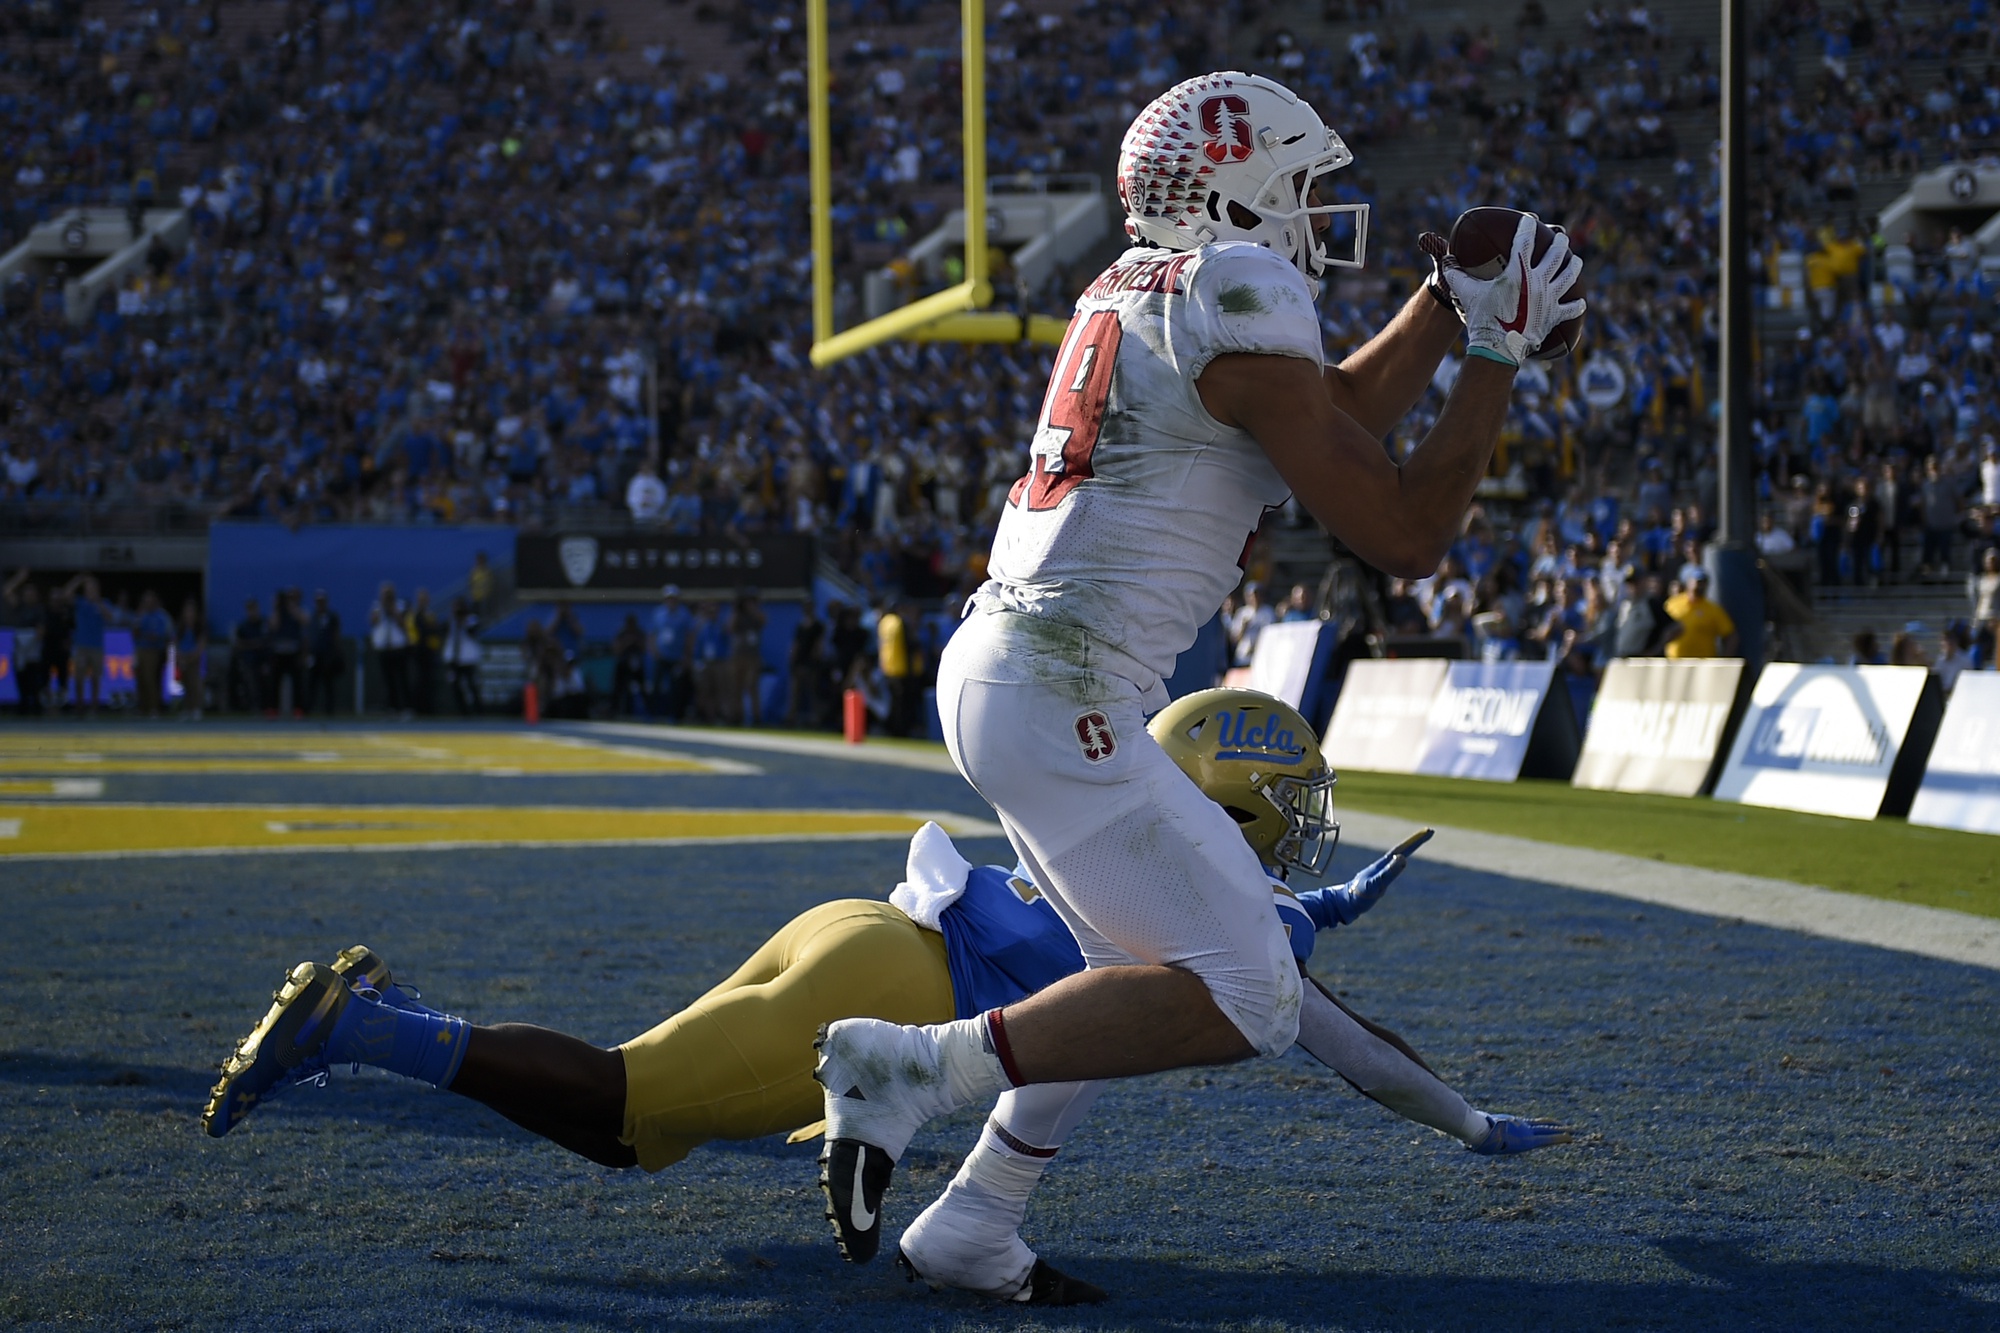 Eagles Select Stanford Wide Receiver JJ Arcega-Whiteside With 57th Overall Pick